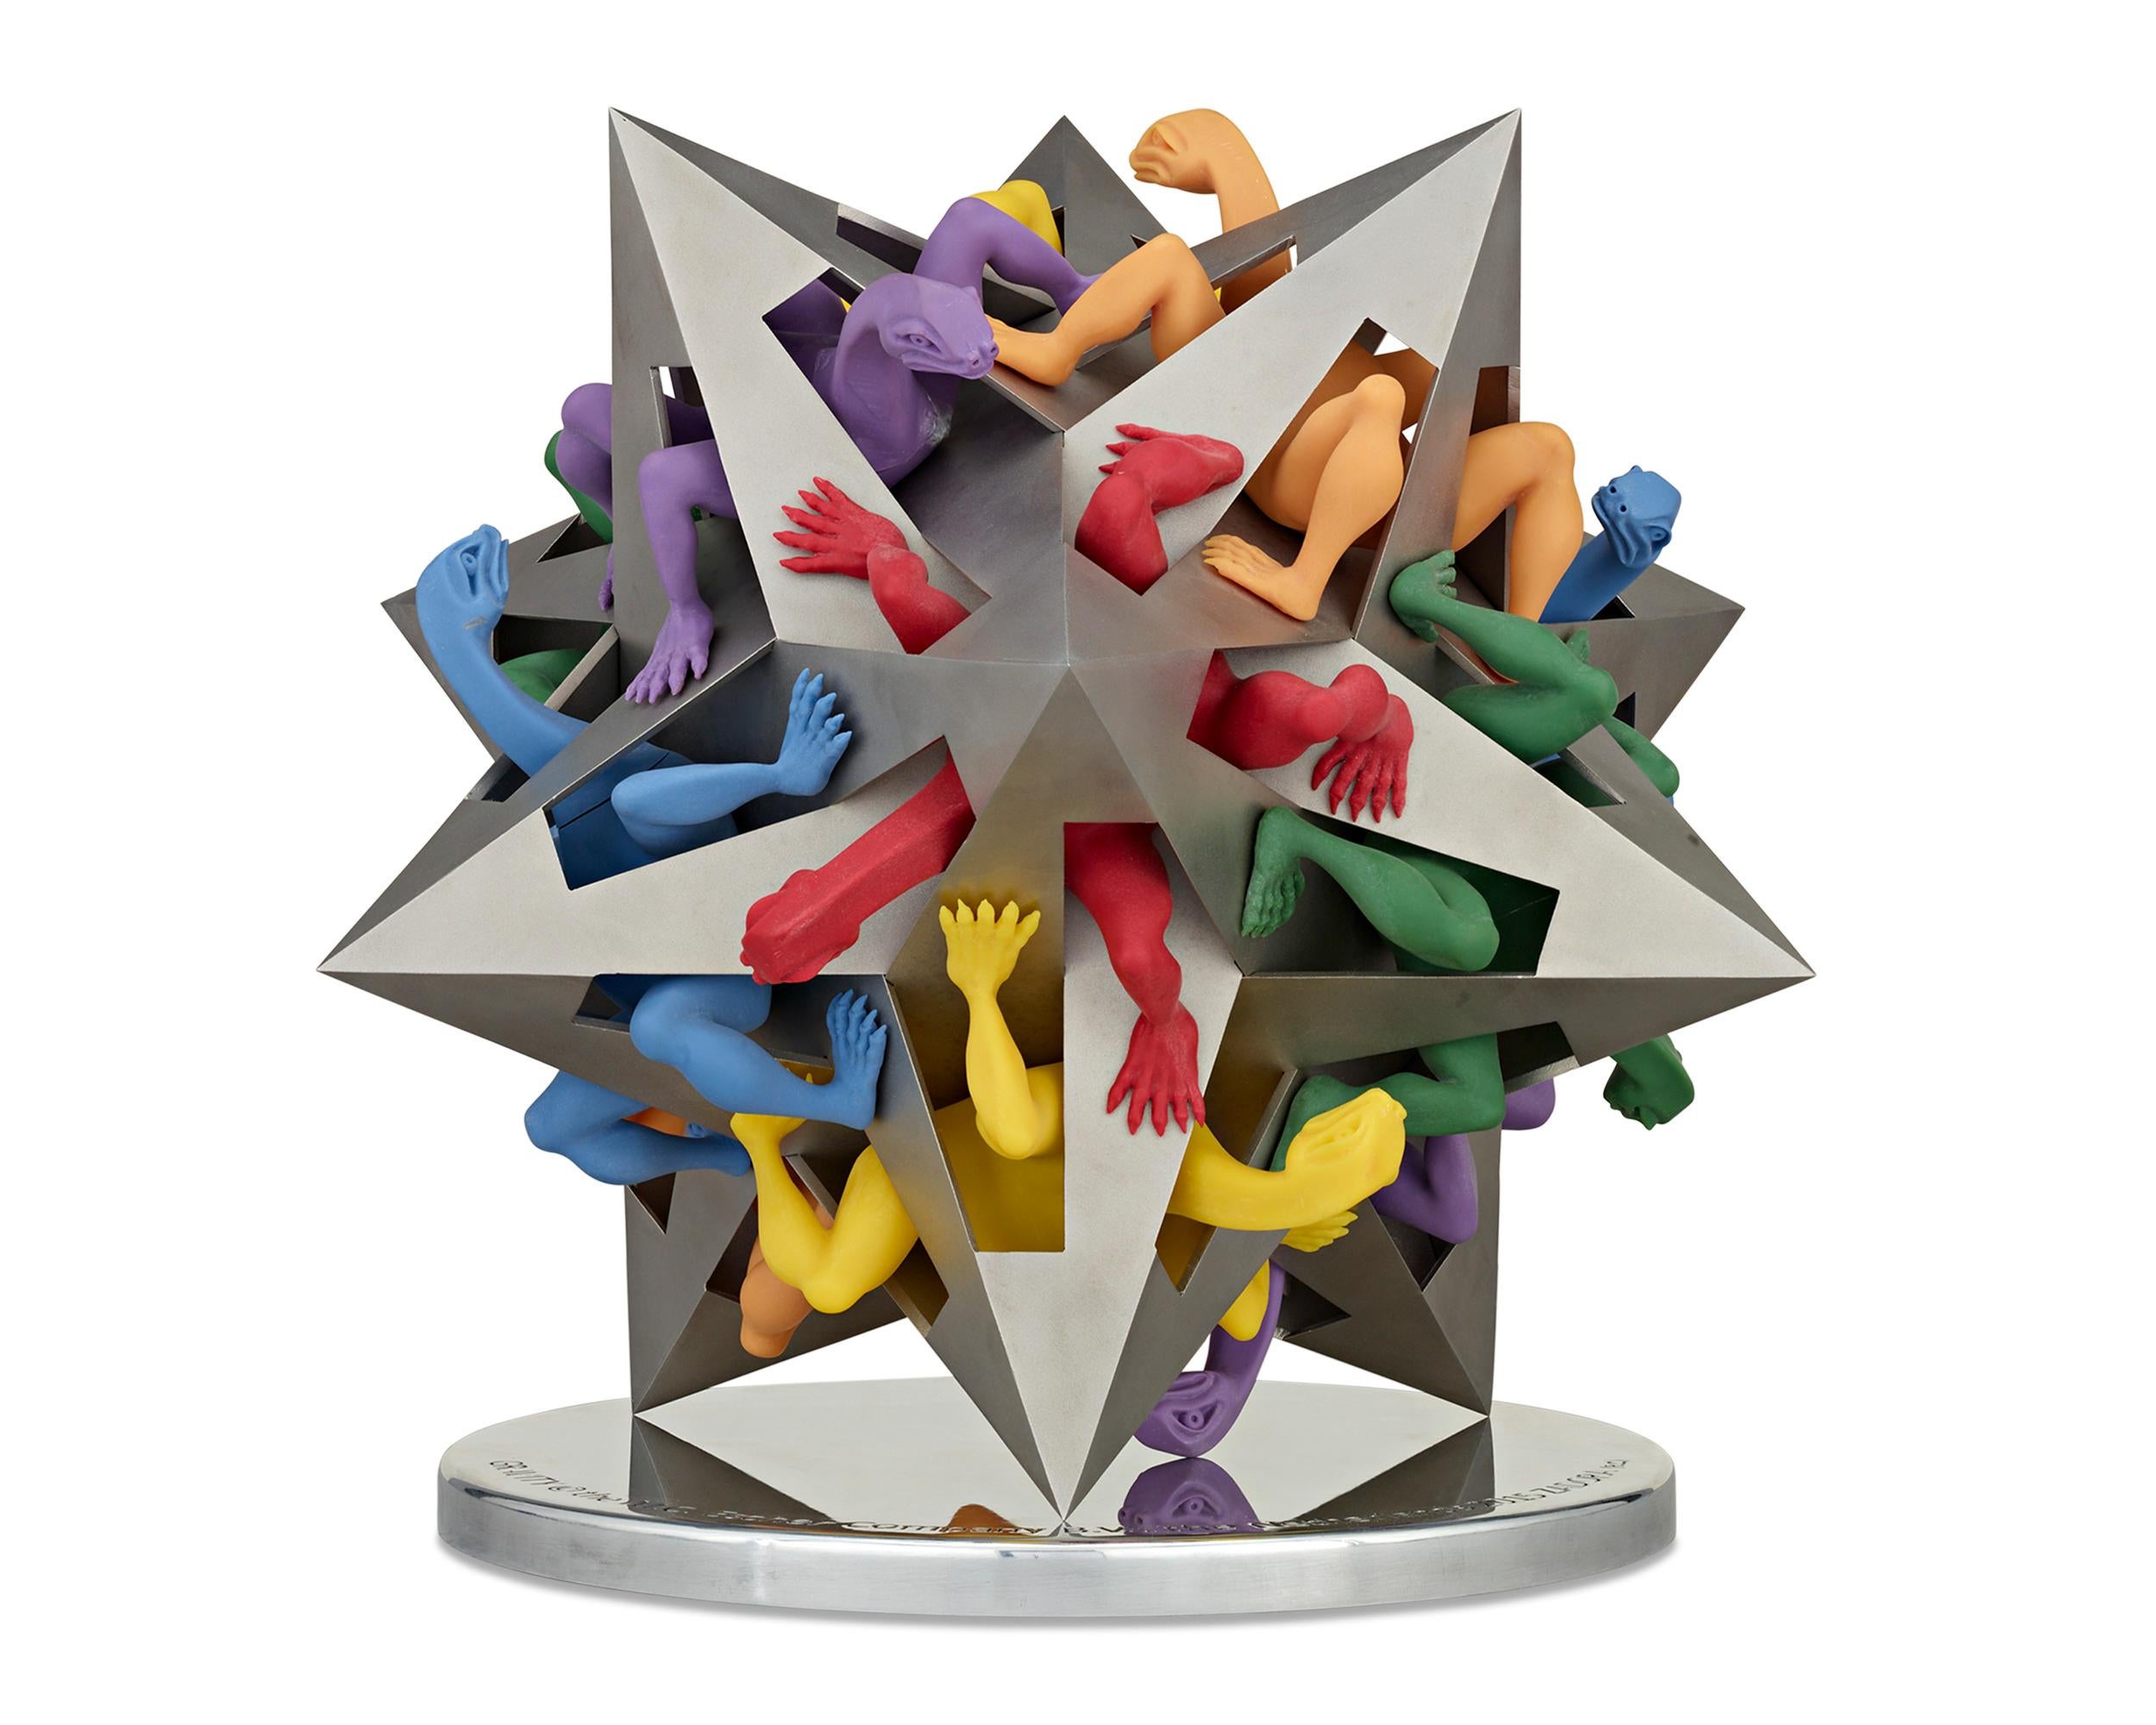 Crafted by the famed jeweler and sculptor Andreas von Zadora-Gerlof, this compelling stainless steel and polymer sculpture brings to life the work of the great M.C. Escher. Escher was renowned for his so-called impossible creations such as this,